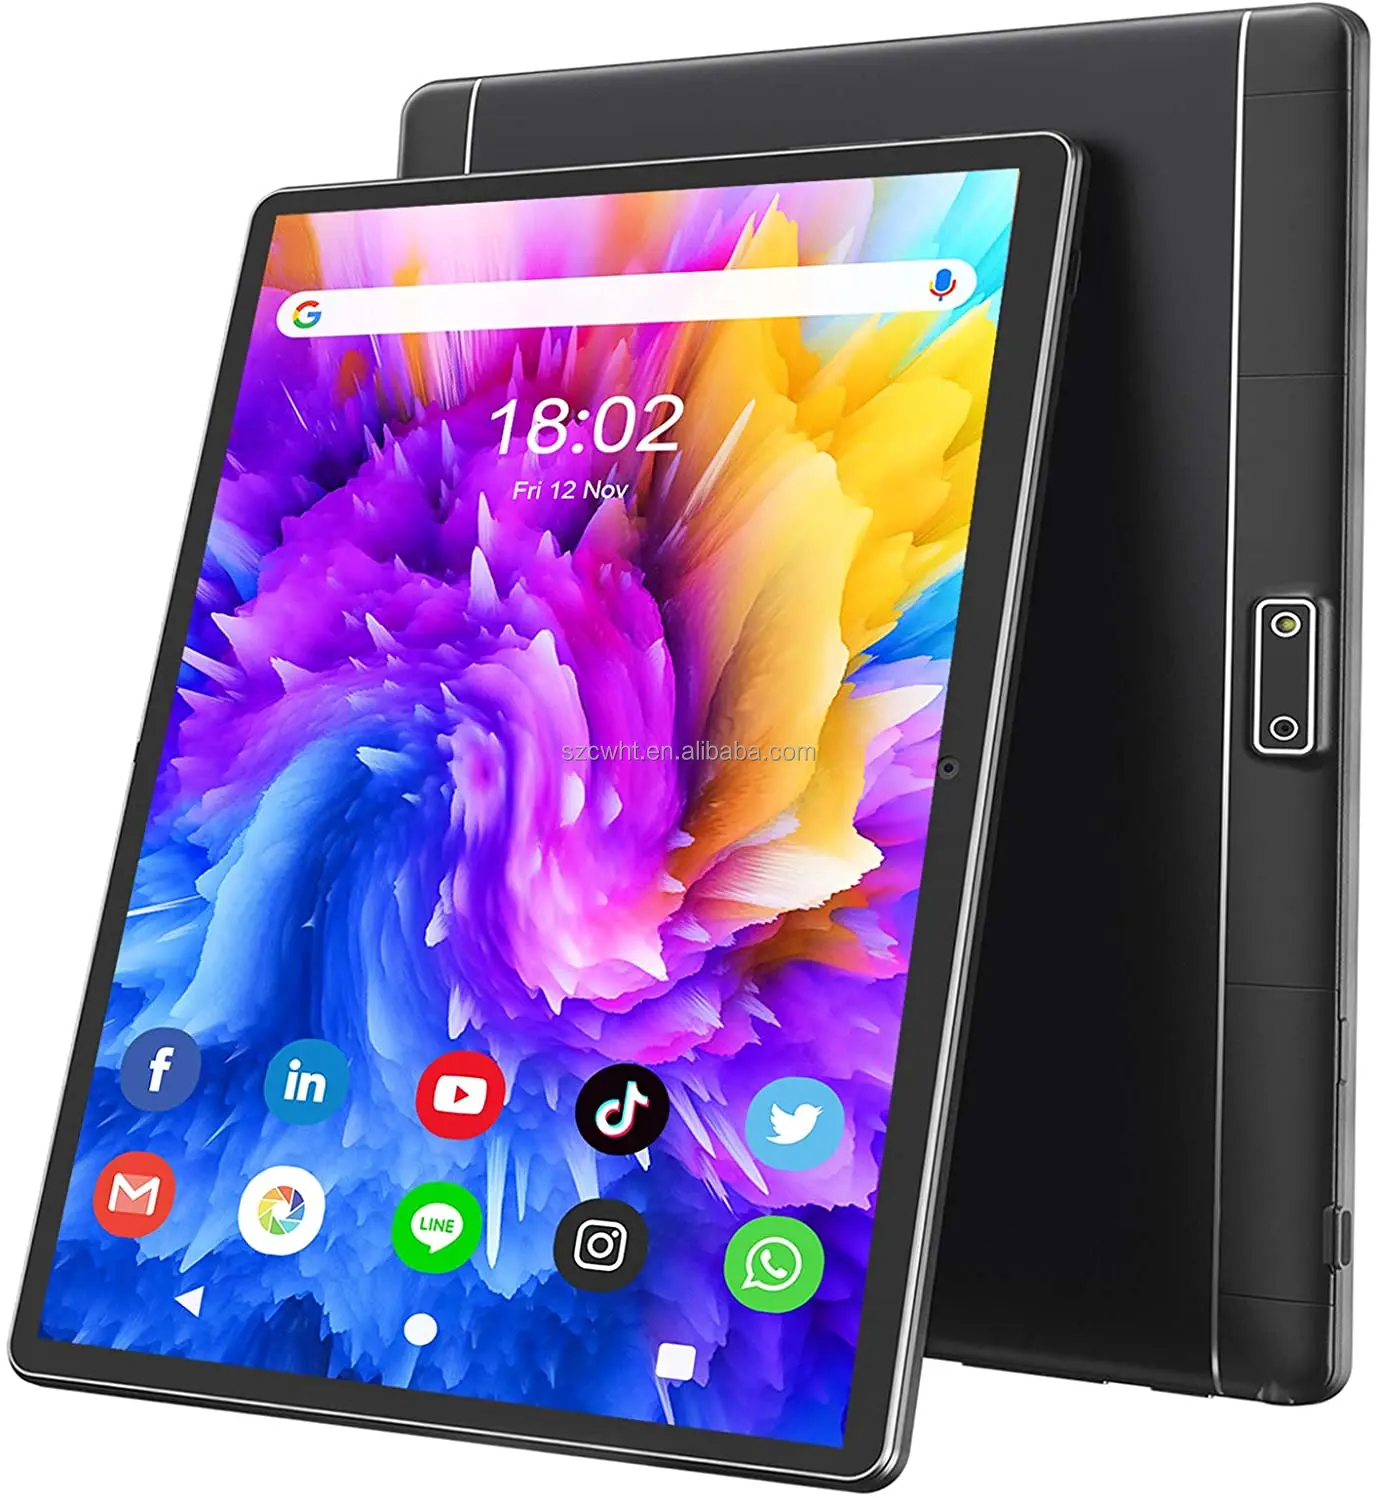 

Cheap oem 10 inch android Octa core Tablets 10 inches with sim card hot sell tablets tablate 10 inches android tablet